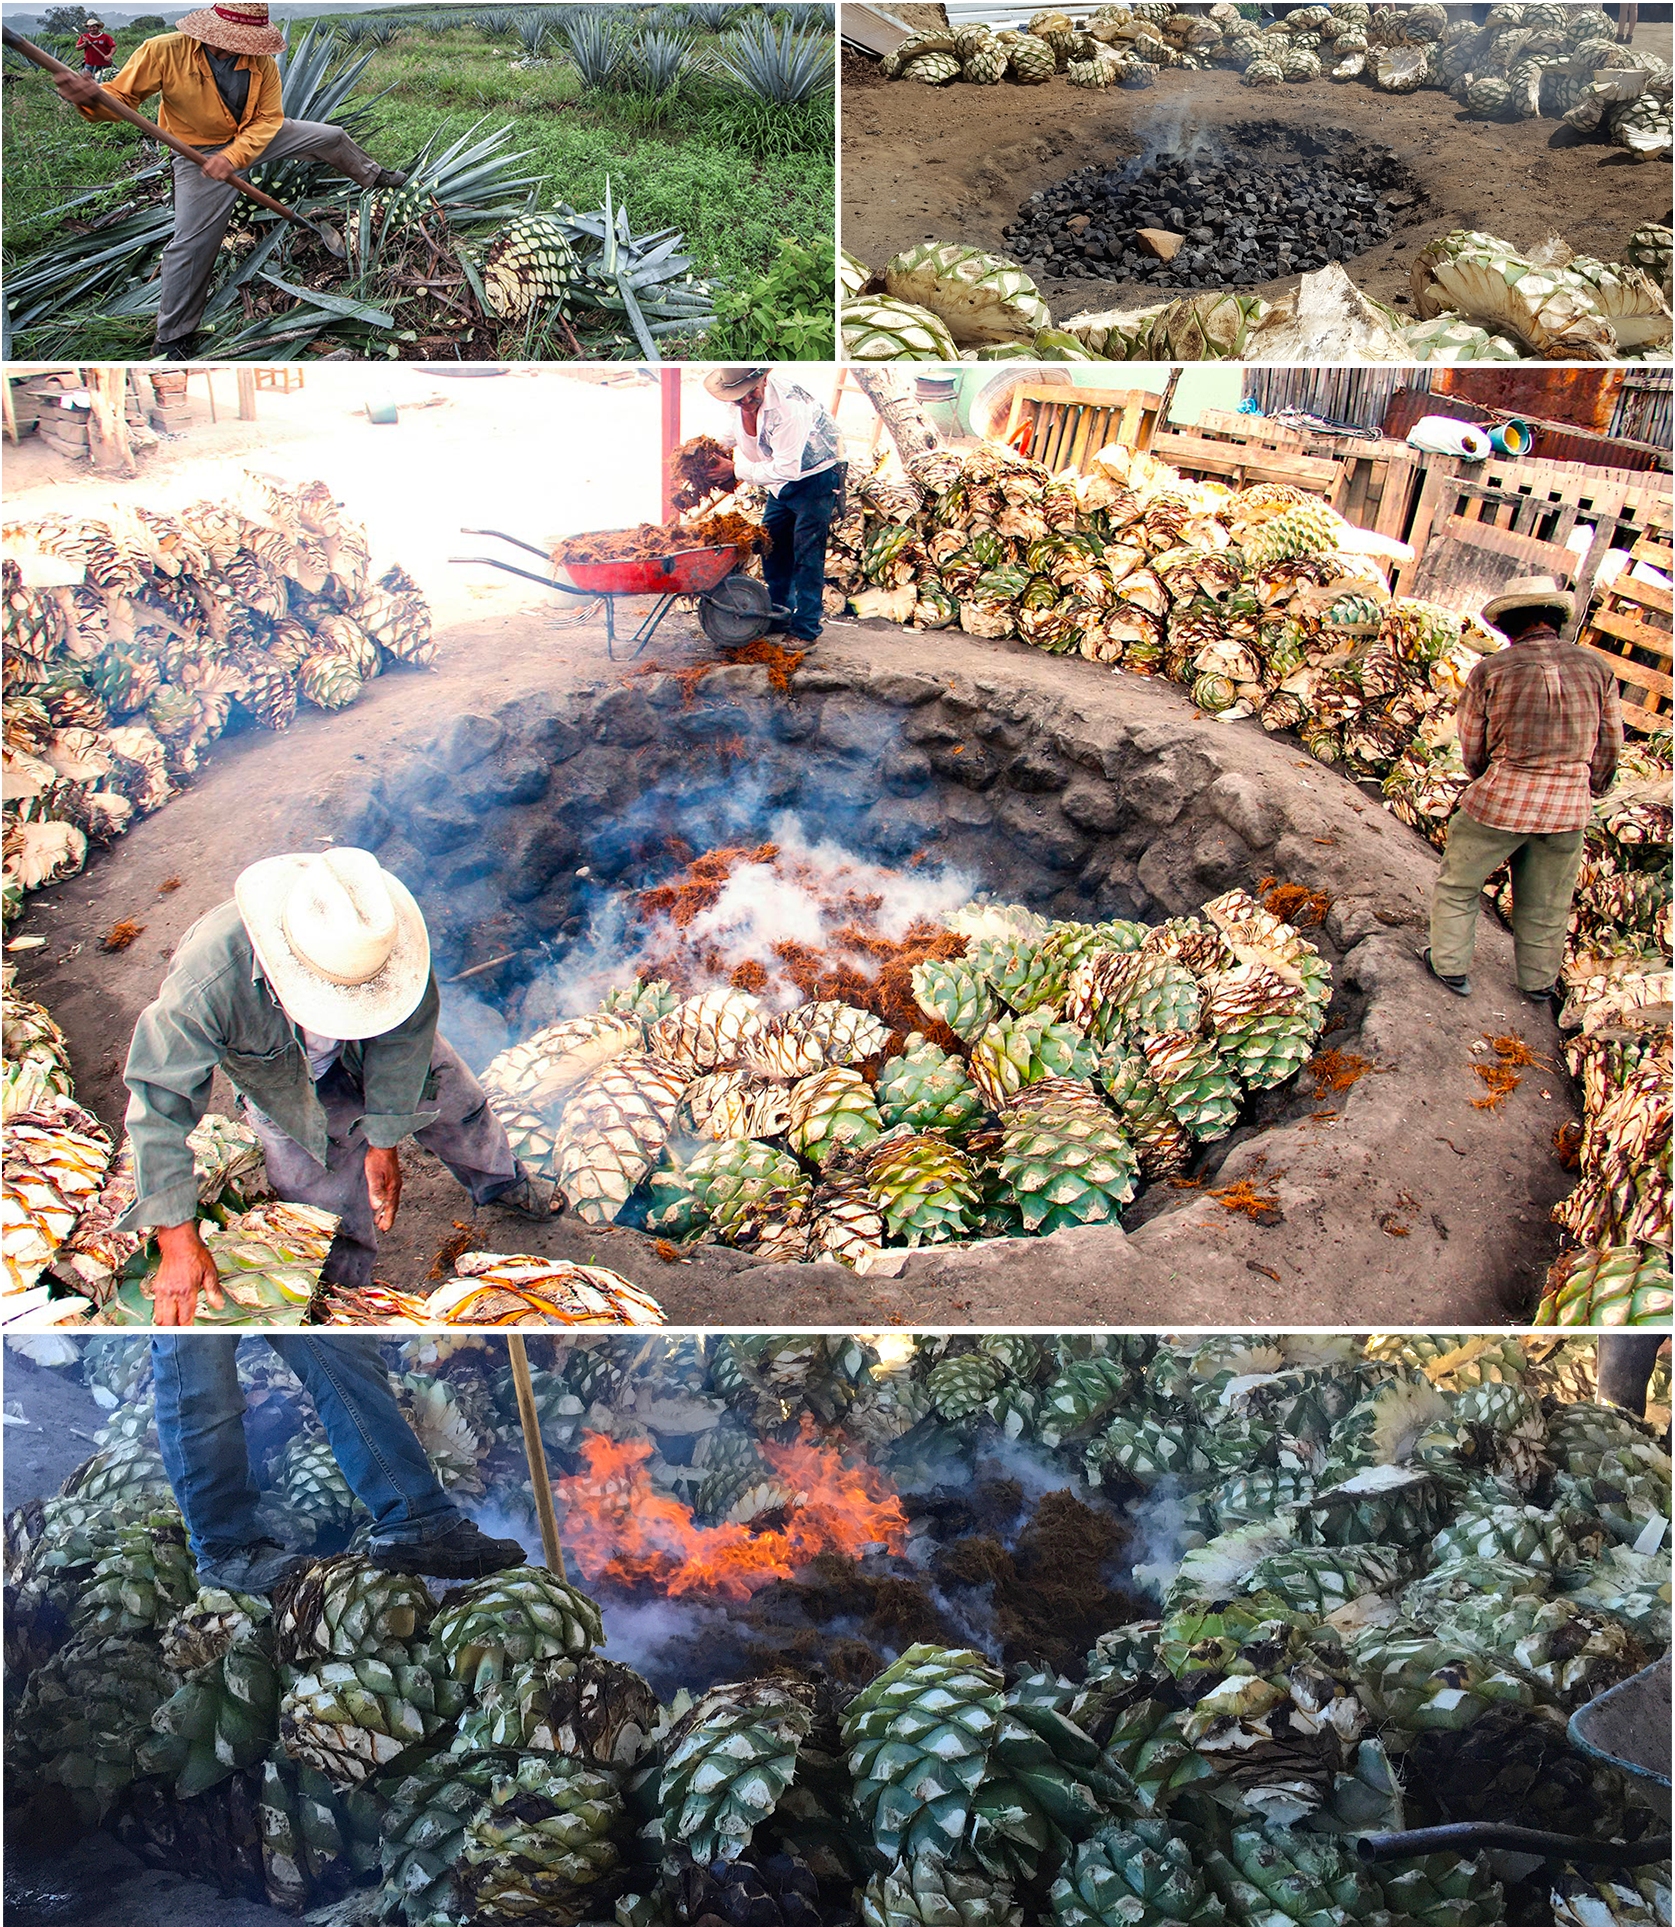 cooking agave for mezcal - jimador - conic stone oven